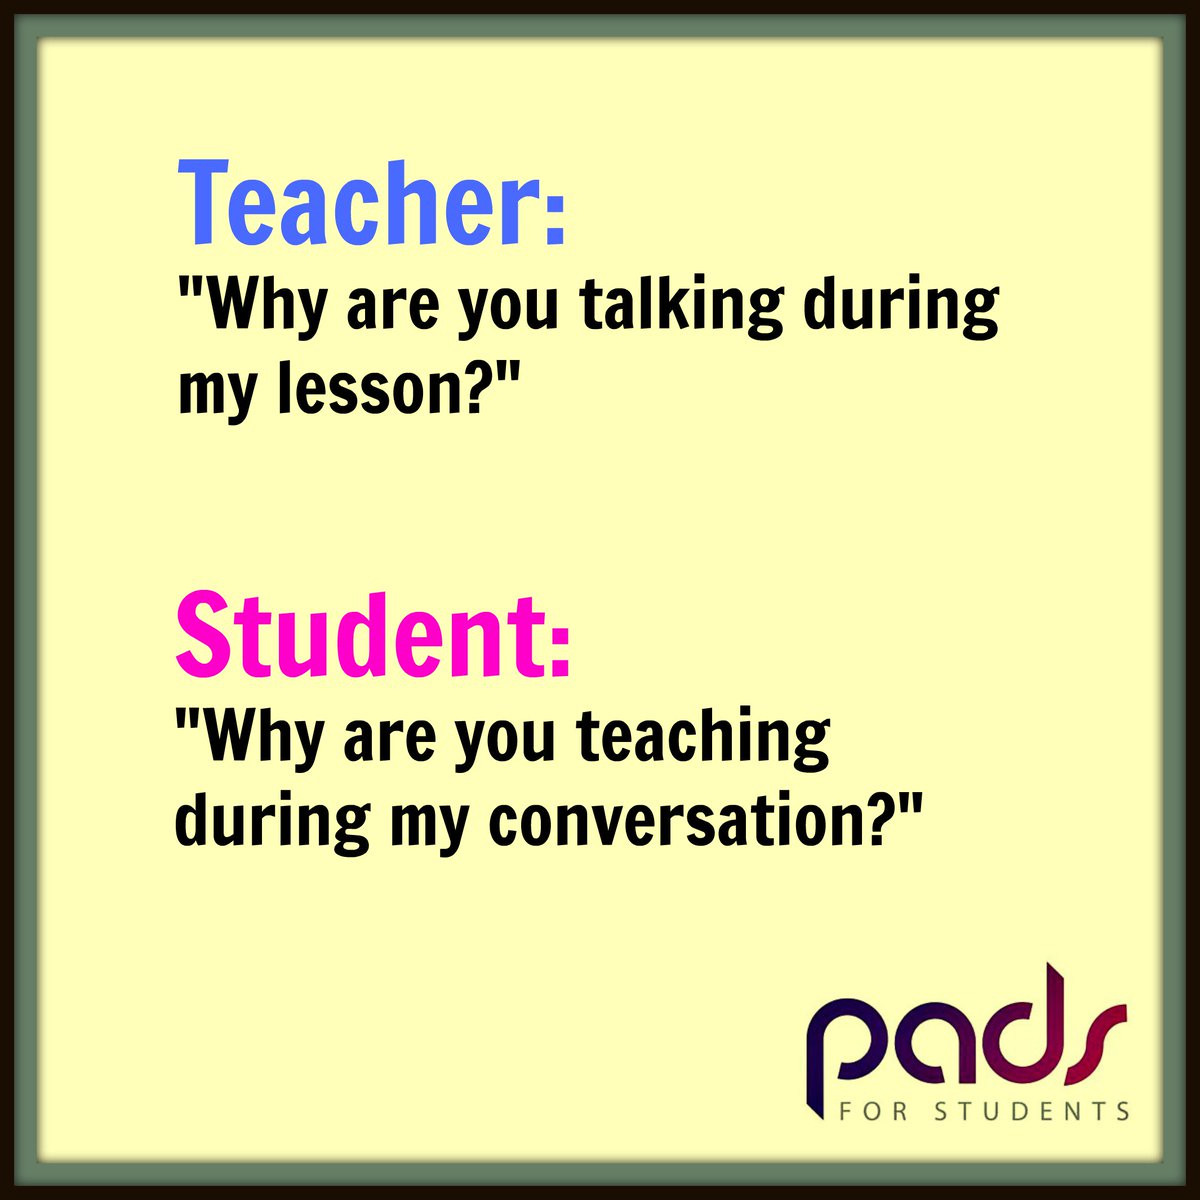 Funny Student Quotes
 Pads For Students on Twitter " studentlife funny quotes